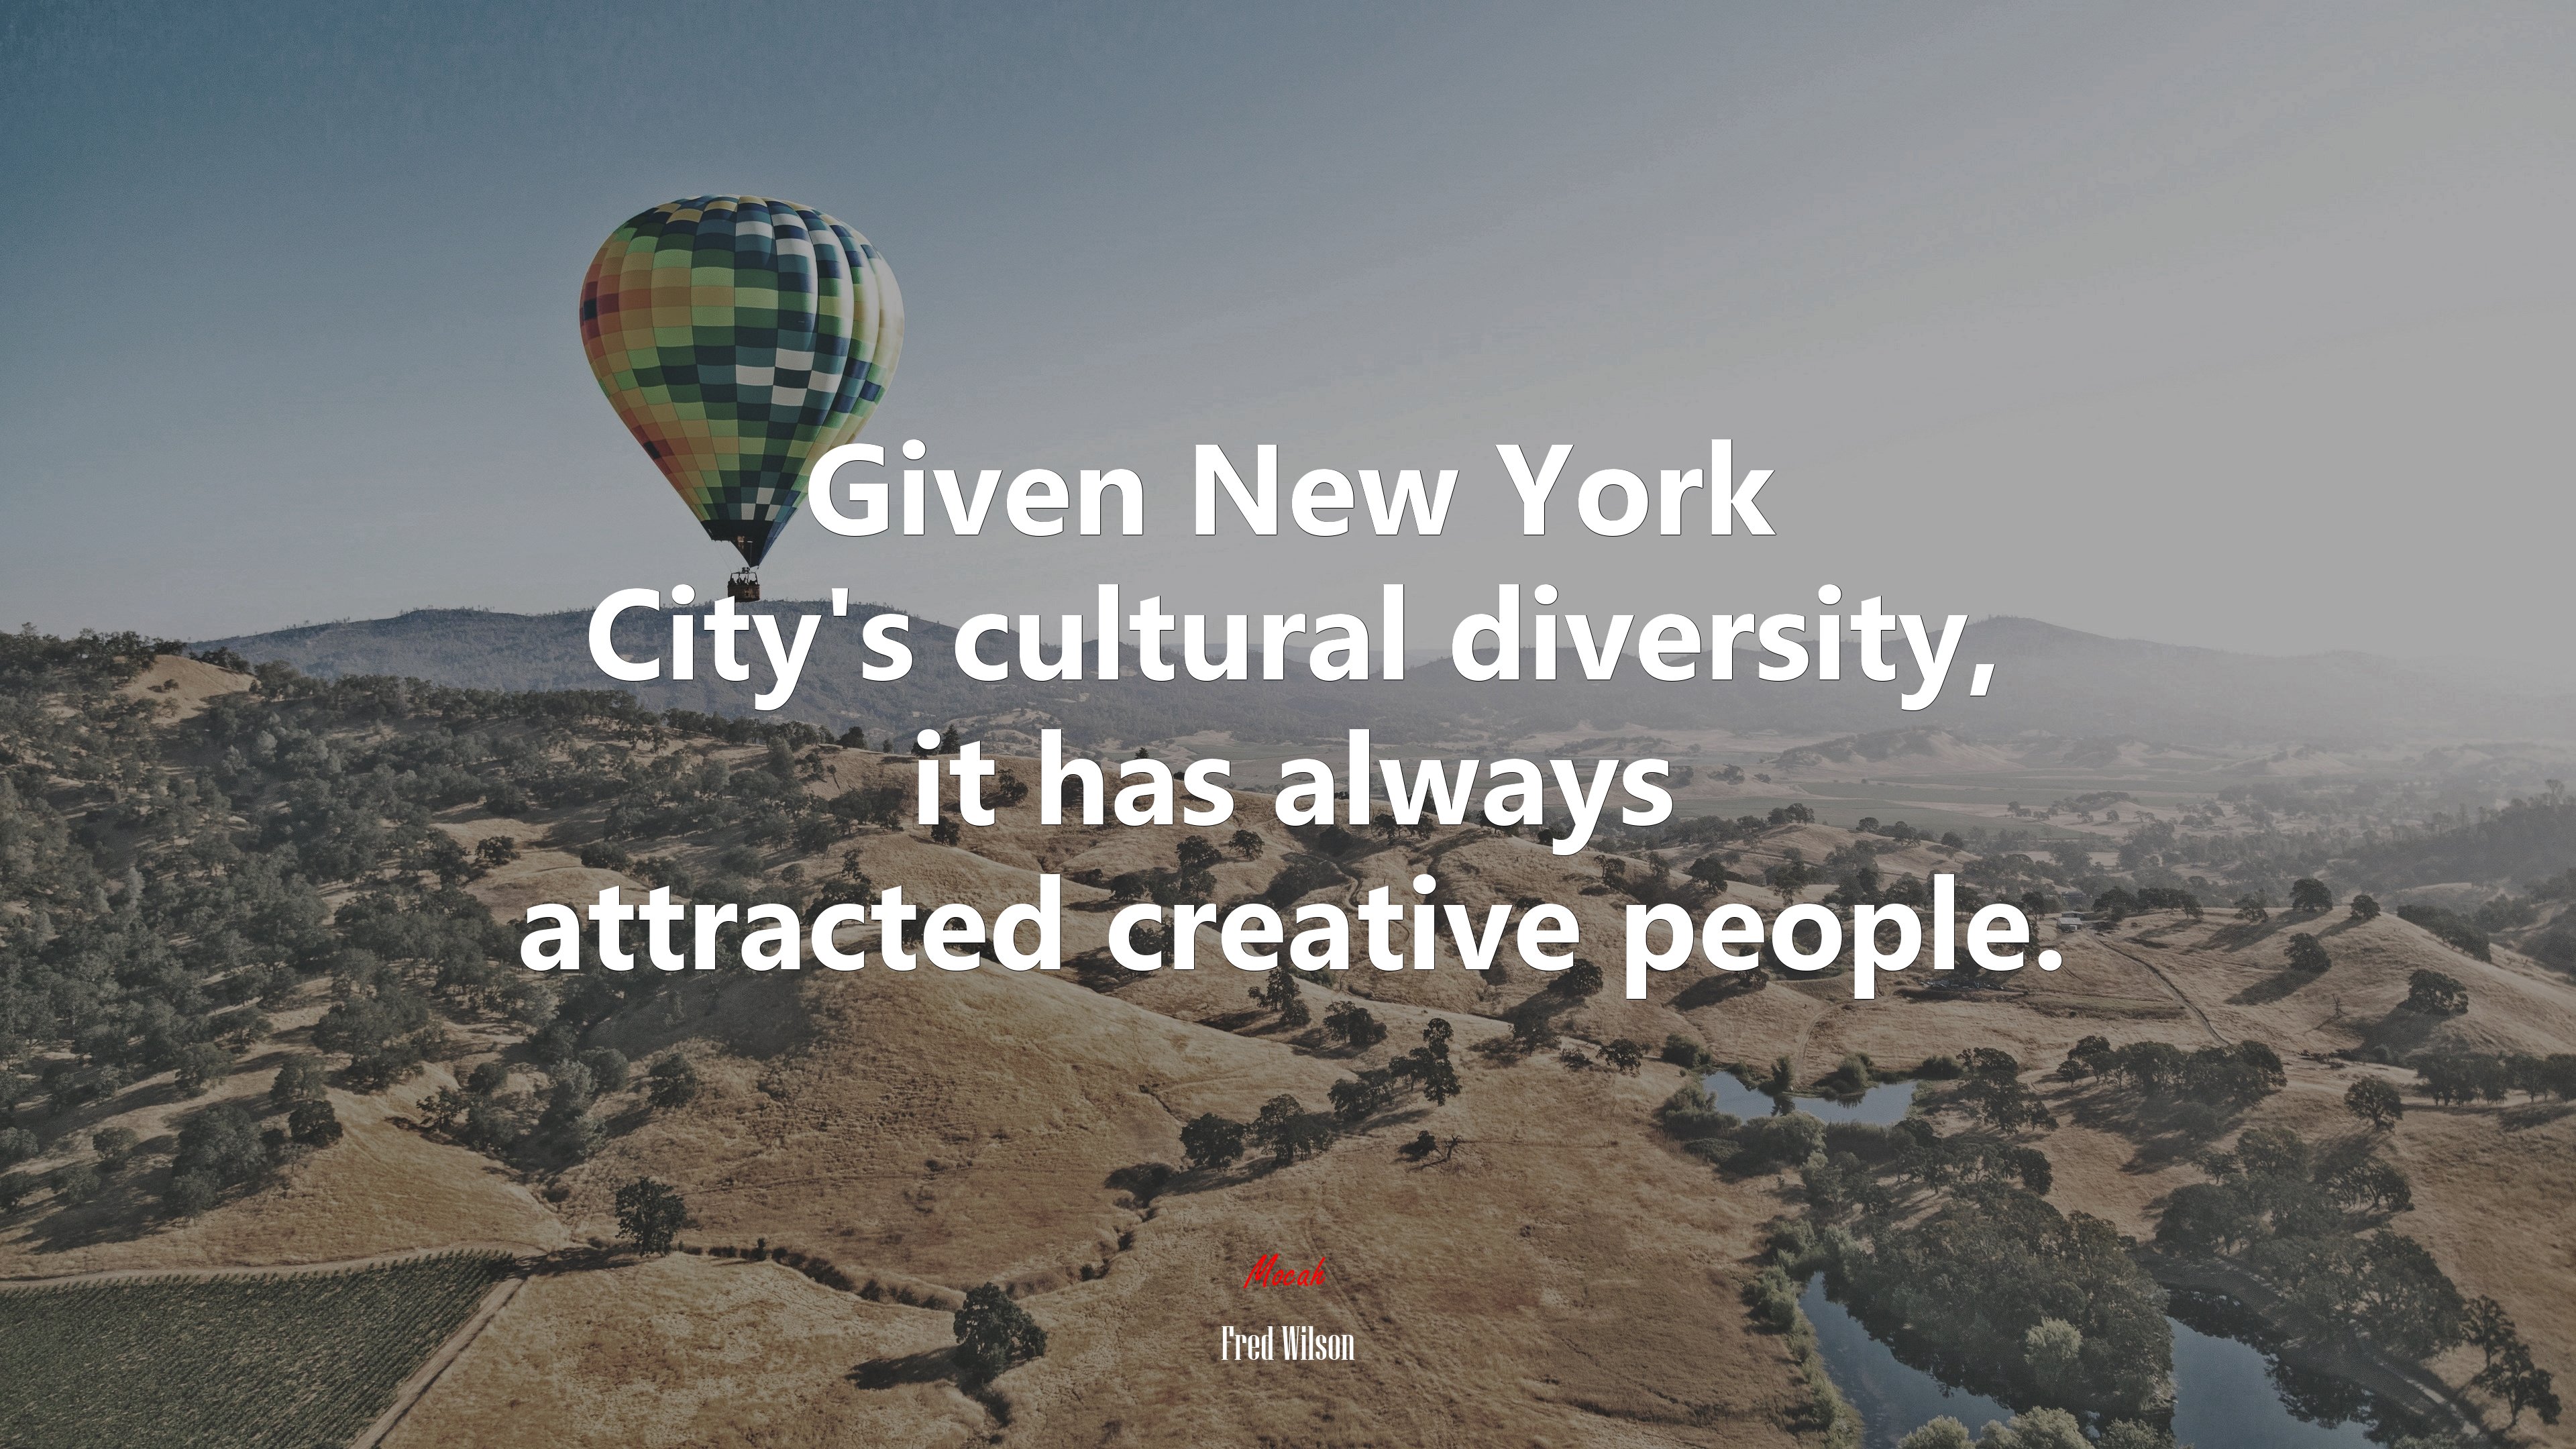 635920 Given New York Citys cultural diversity it has always